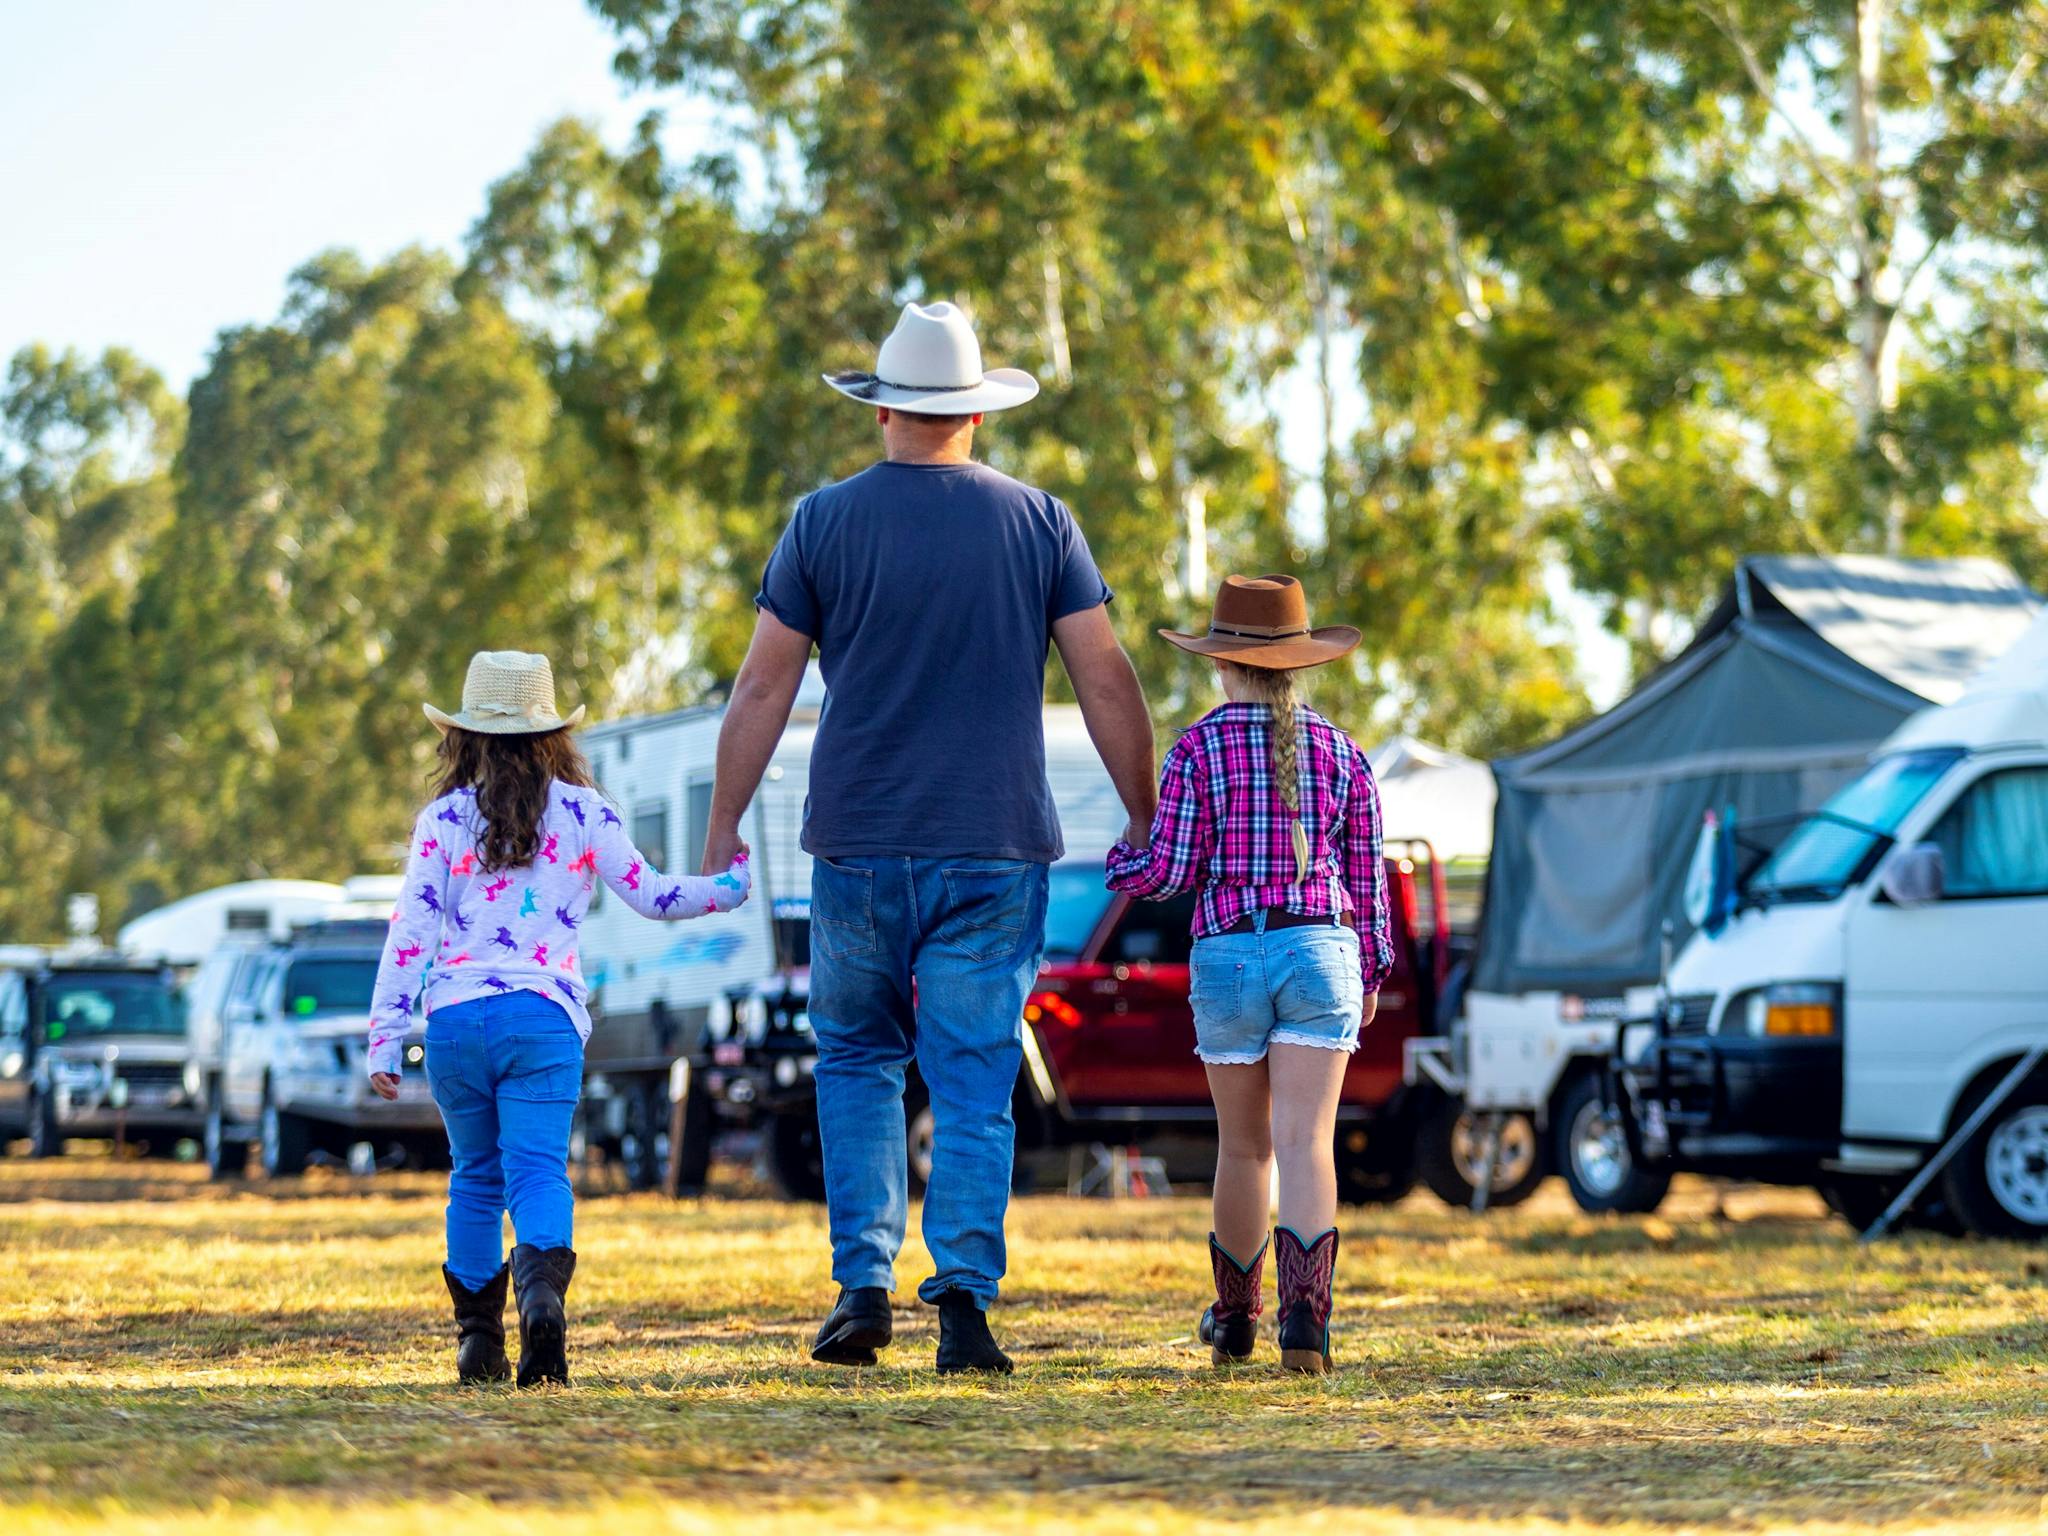 Spend some time with the family while visiting Australian Camp Oven Festival